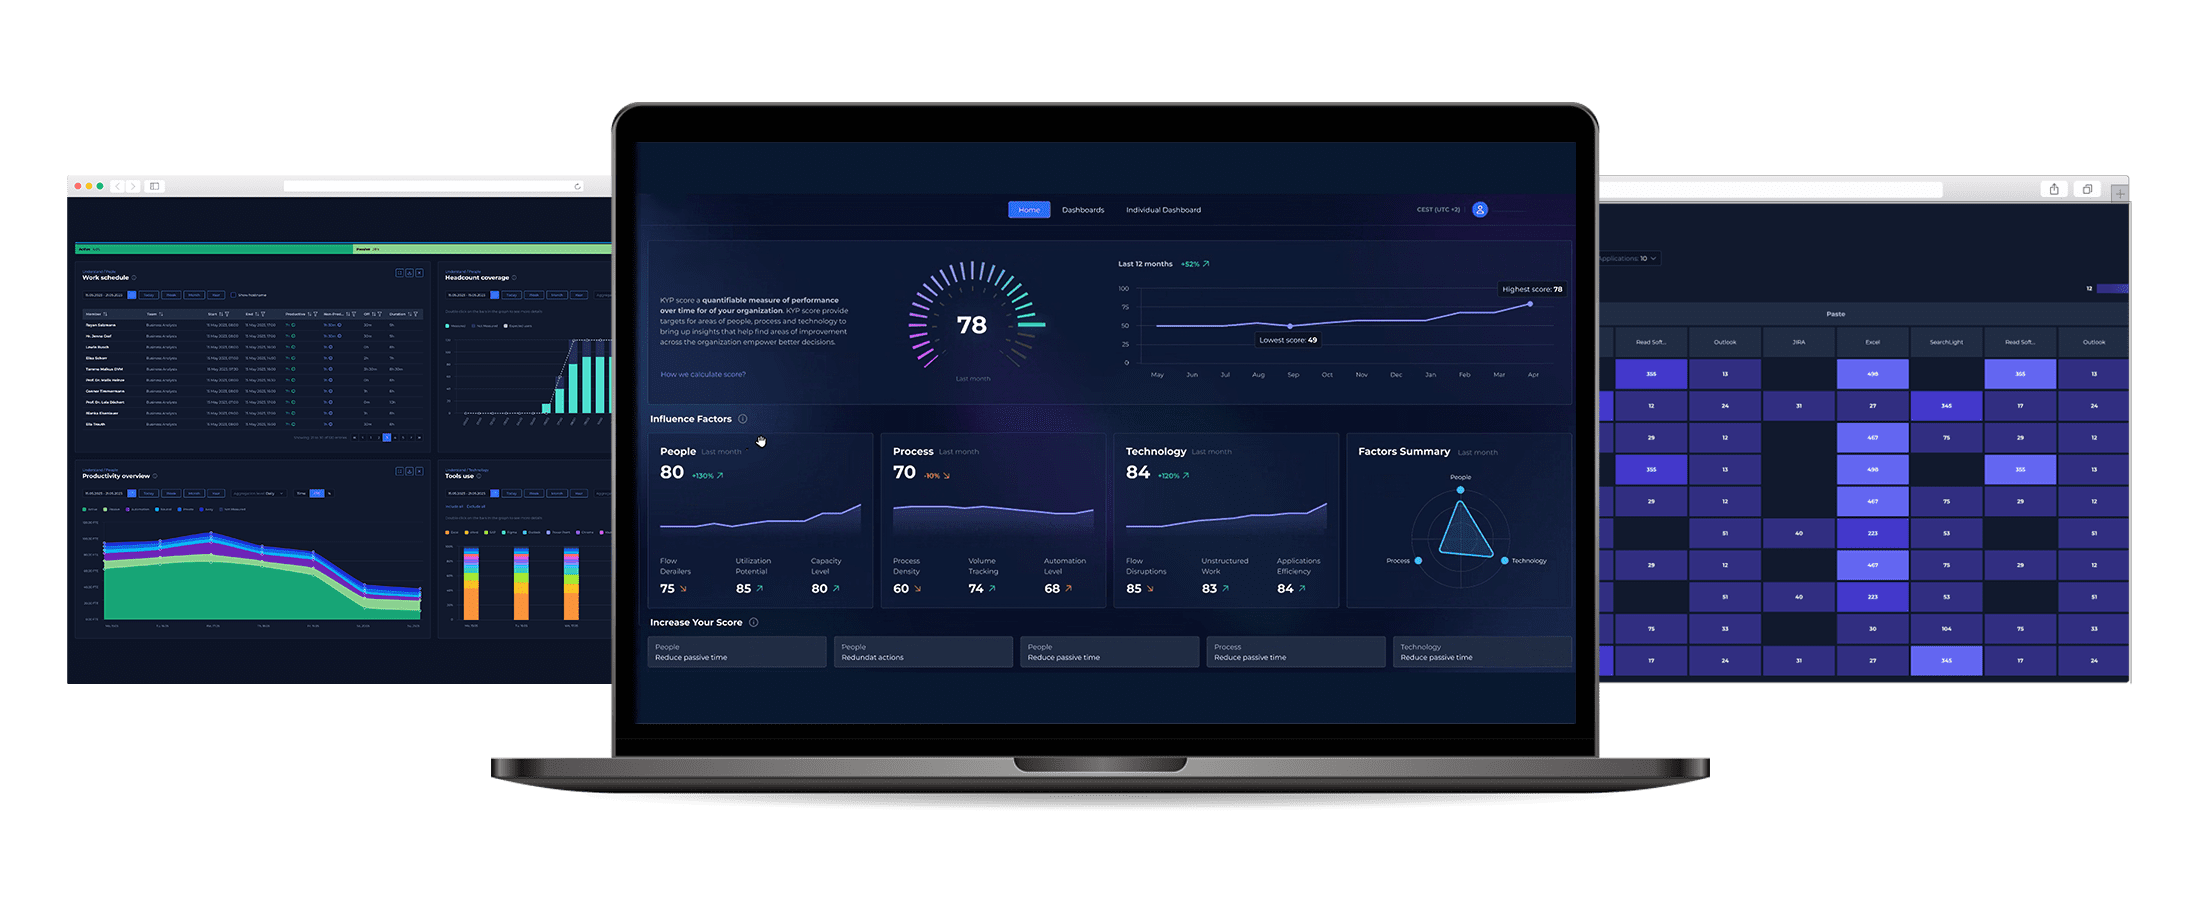 dashboard of the platform showing insights on process intelligence